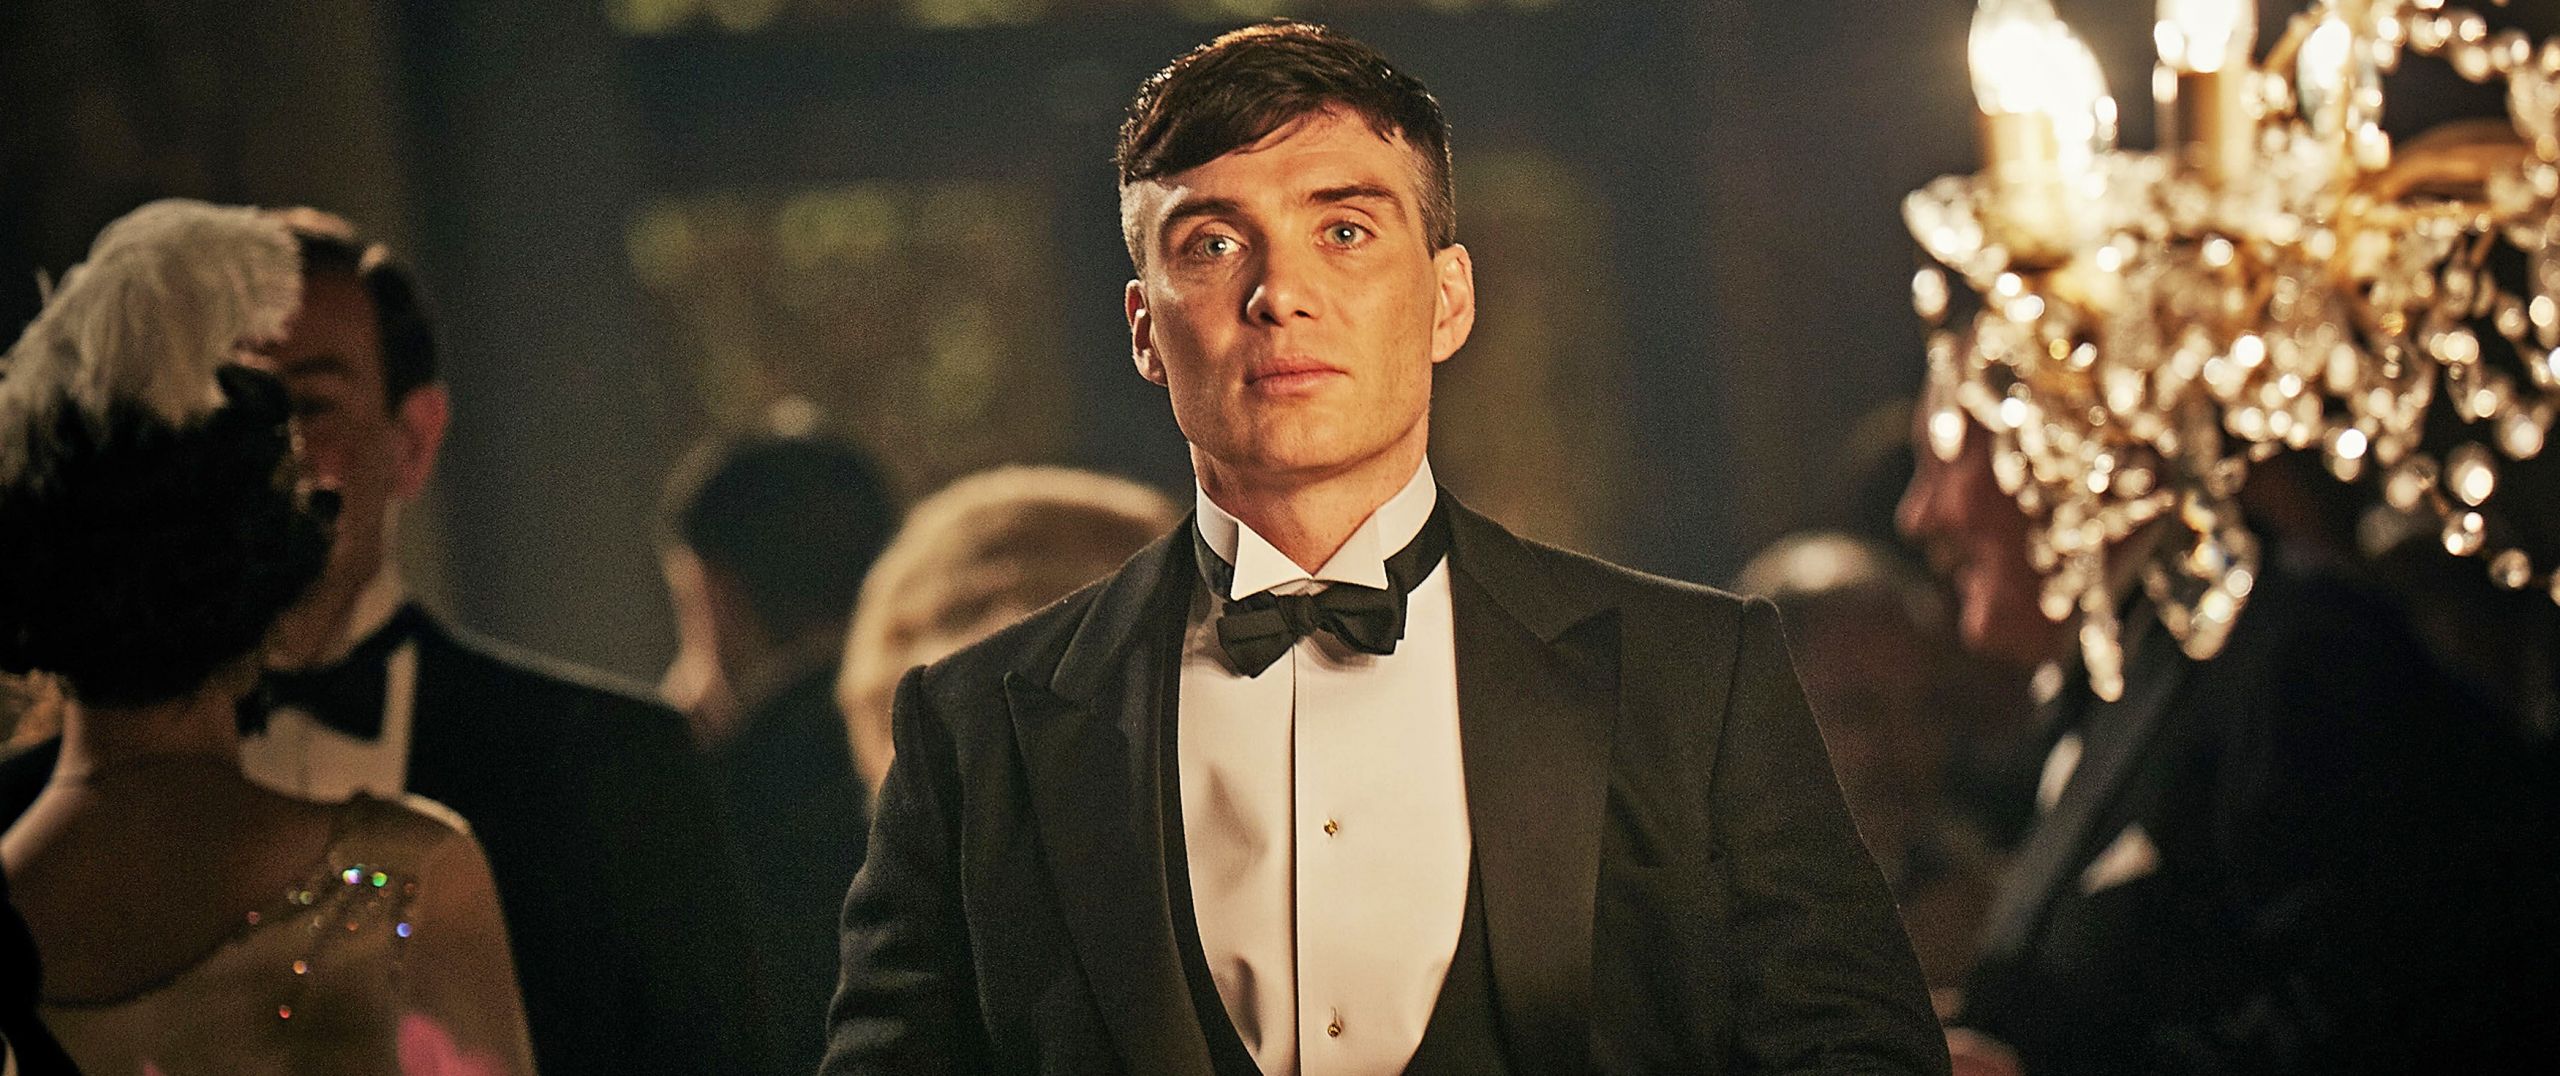 rare image of Tommy Shelby smiling : r/PeakyBlinders